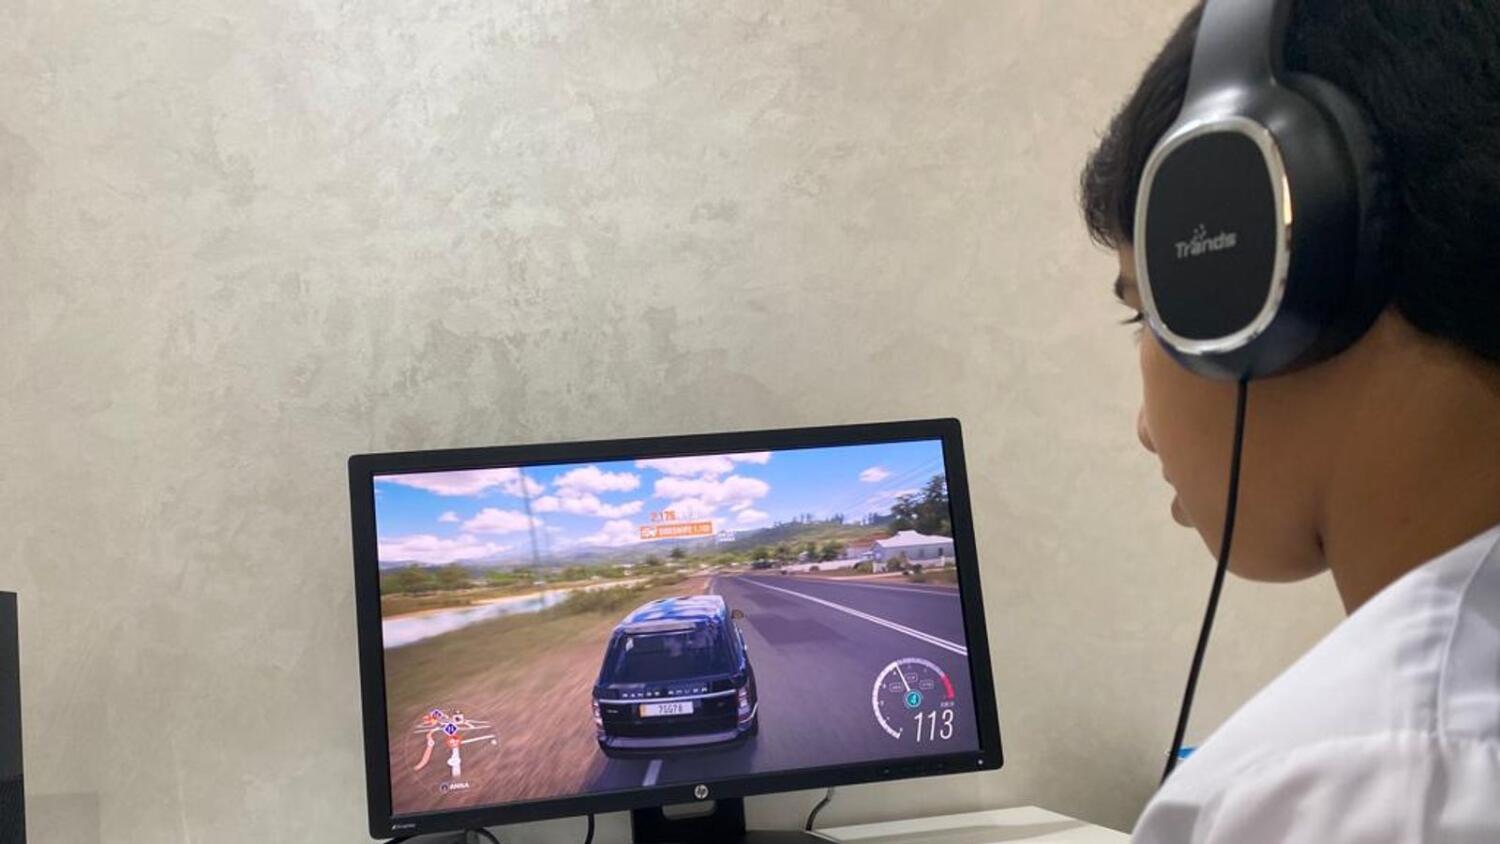 Abu Dhabi Police call on parents to protect children from violent games